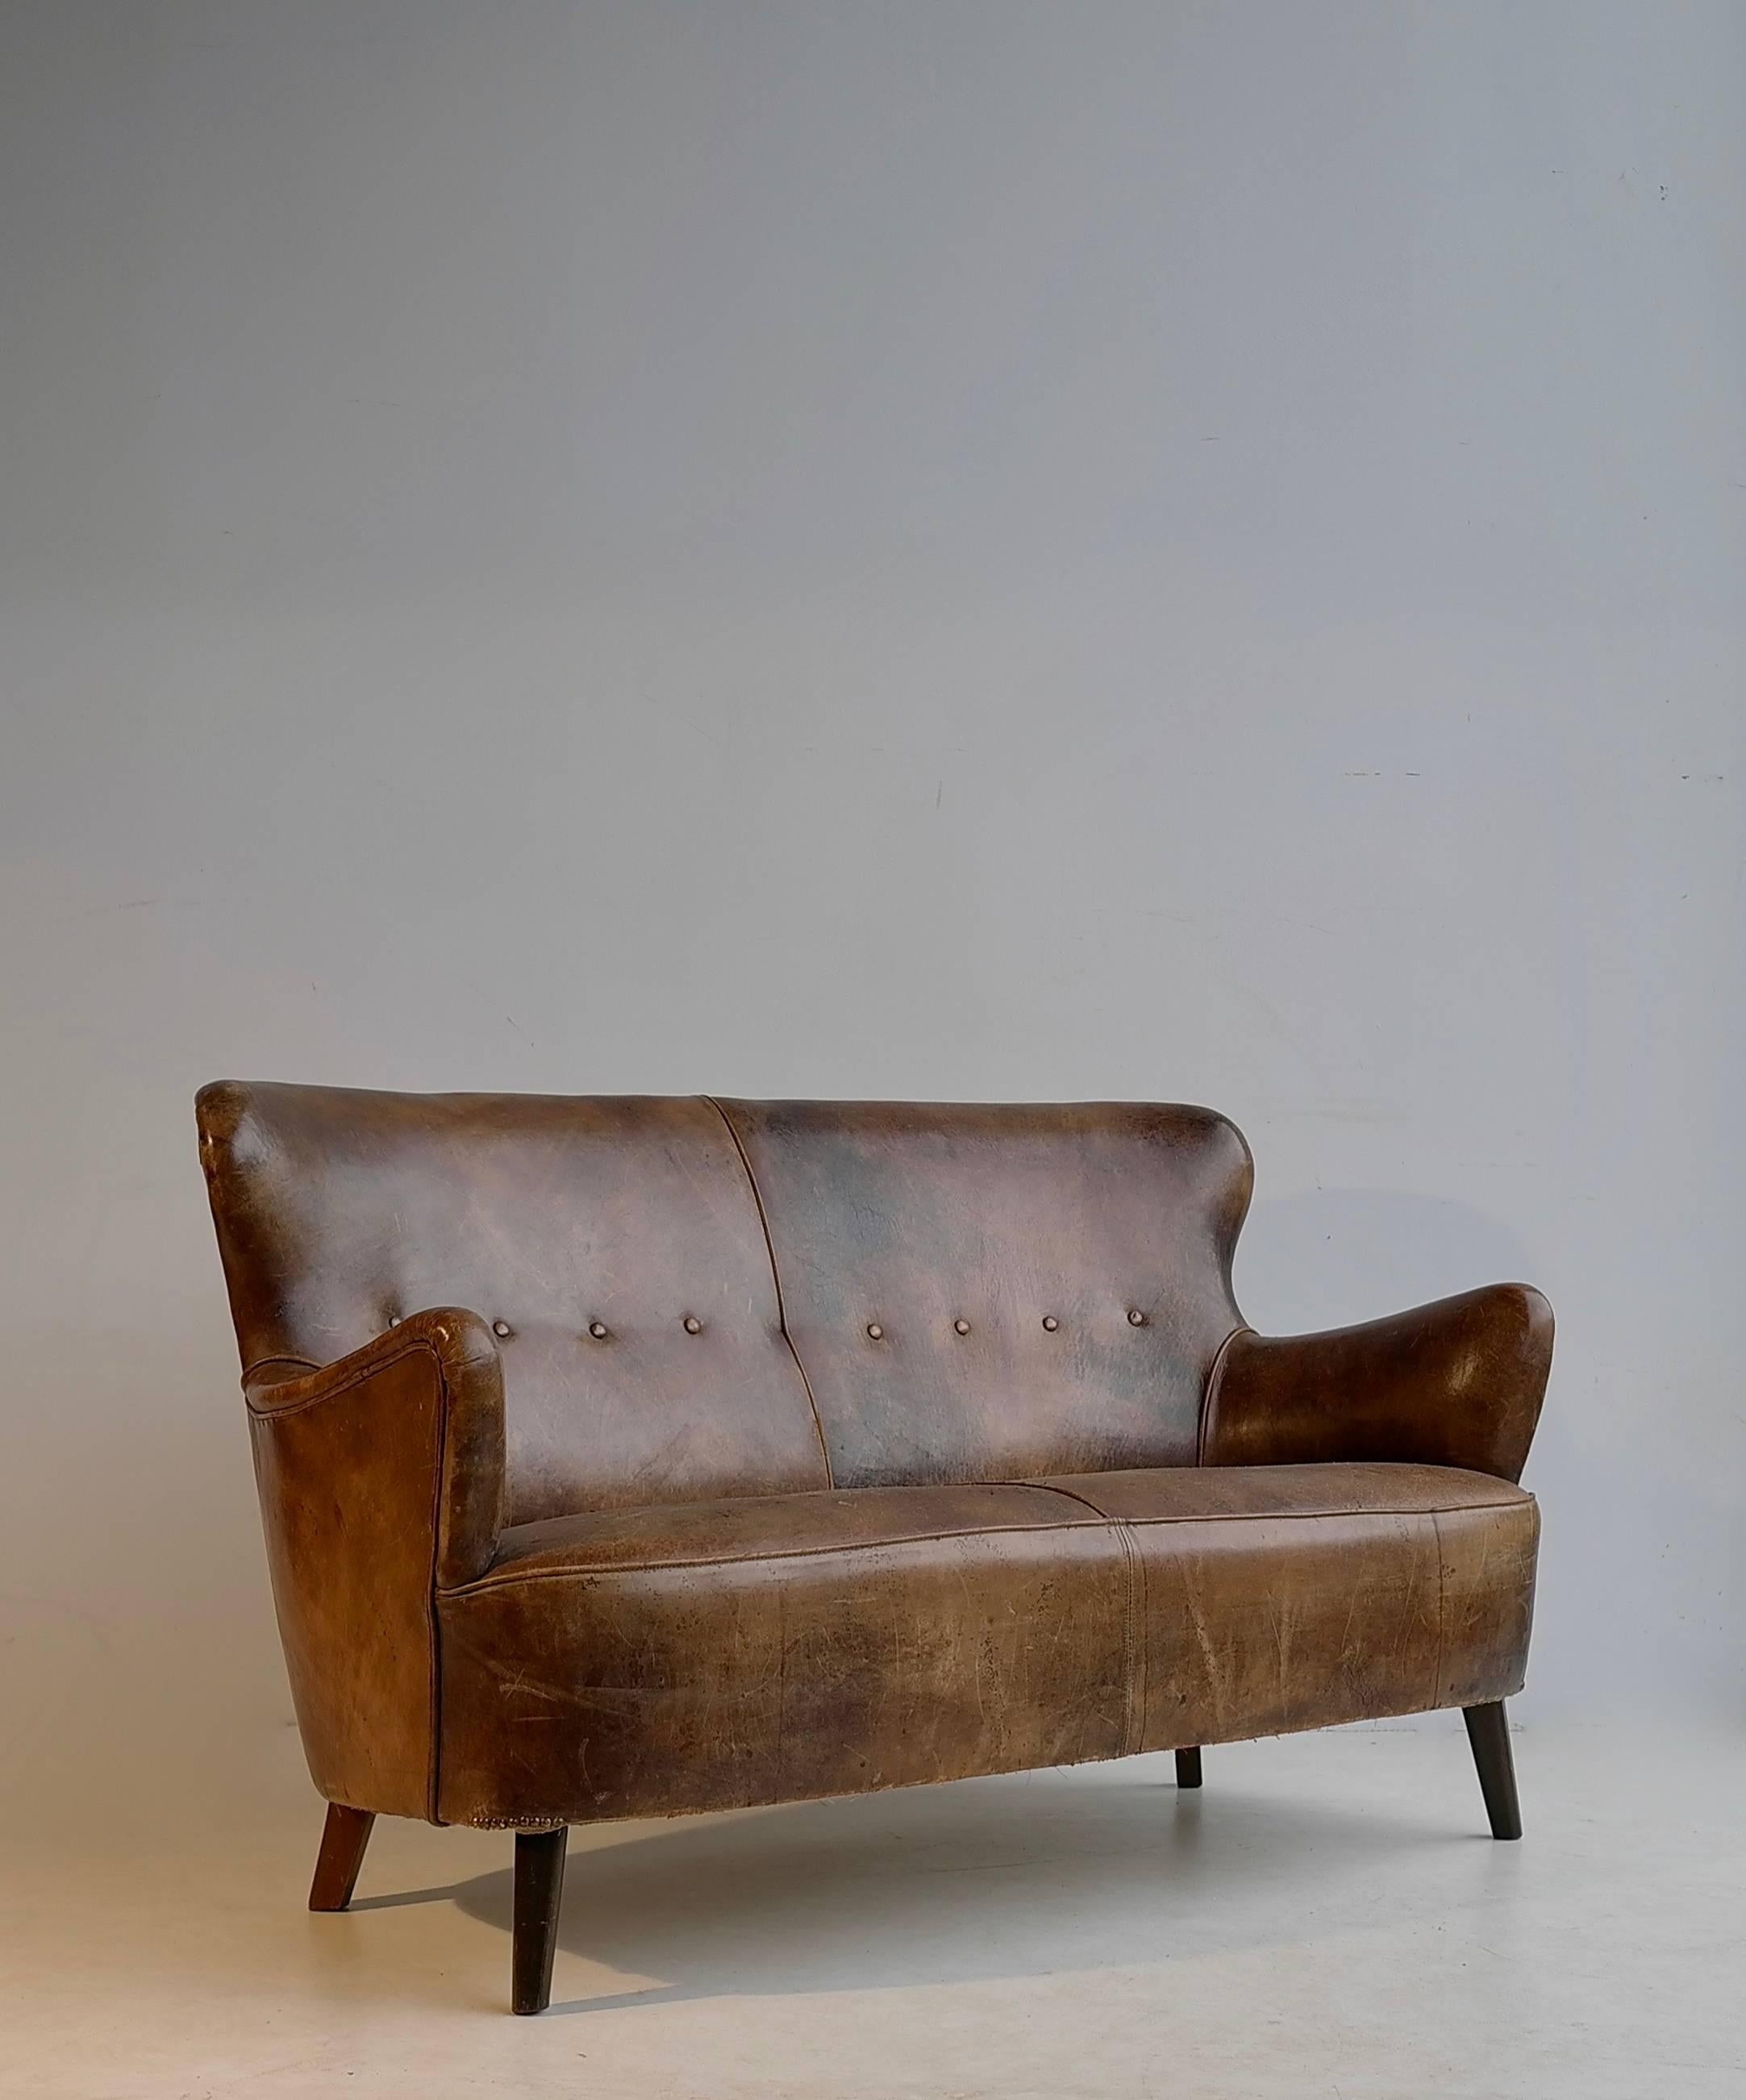 Dutch Cognac Leather Sofa with a Rich Patina, by Theo Ruth for Artifort